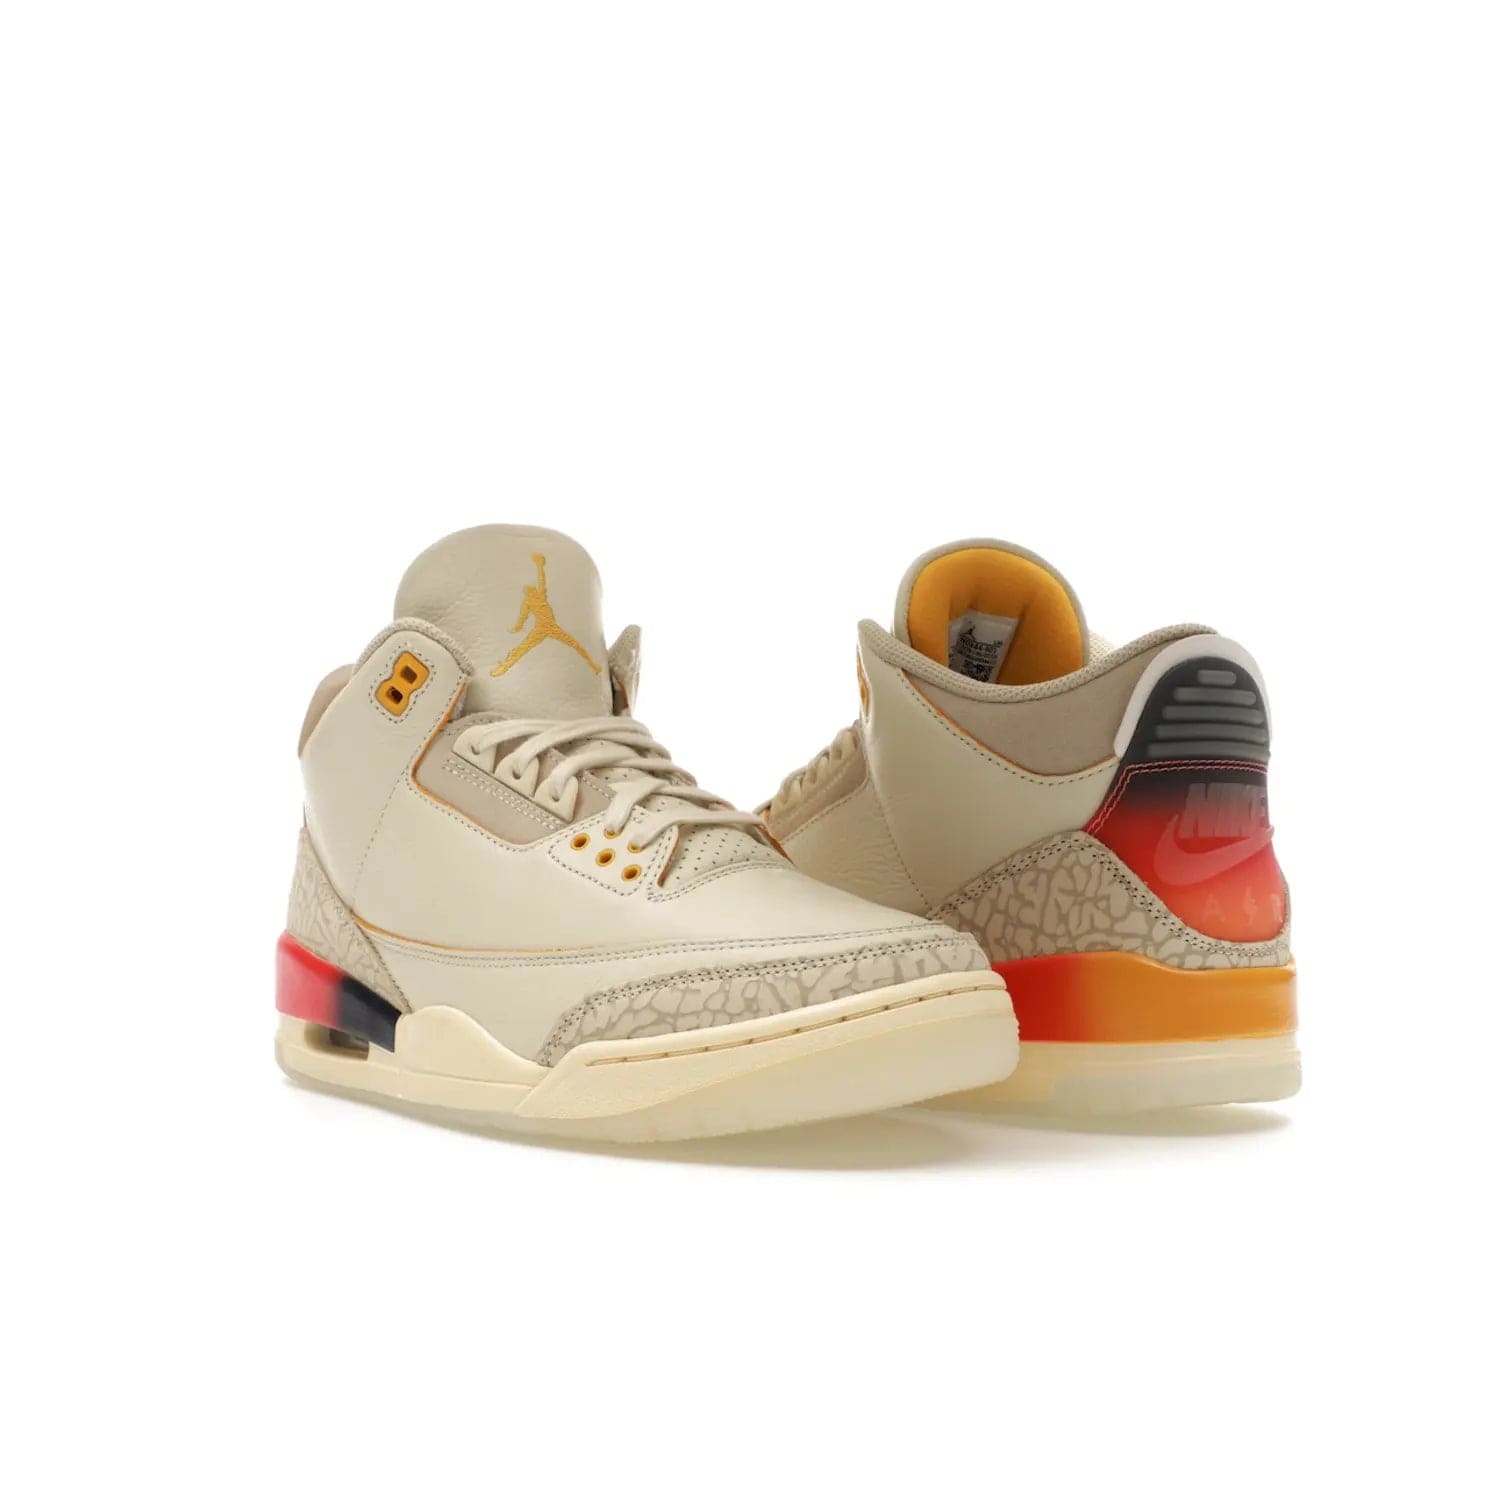 Jordan 3 Retro SP J Balvin Medellín Sunset - Image 6 - Only at www.BallersClubKickz.com - J Balvin x Jordan 3 Retro SP: Celebrate the joy of life with a colorful, homage to the electrifying reggaeton culture and iconic Jordan 3. Limited edition, Sept. 23. $250.